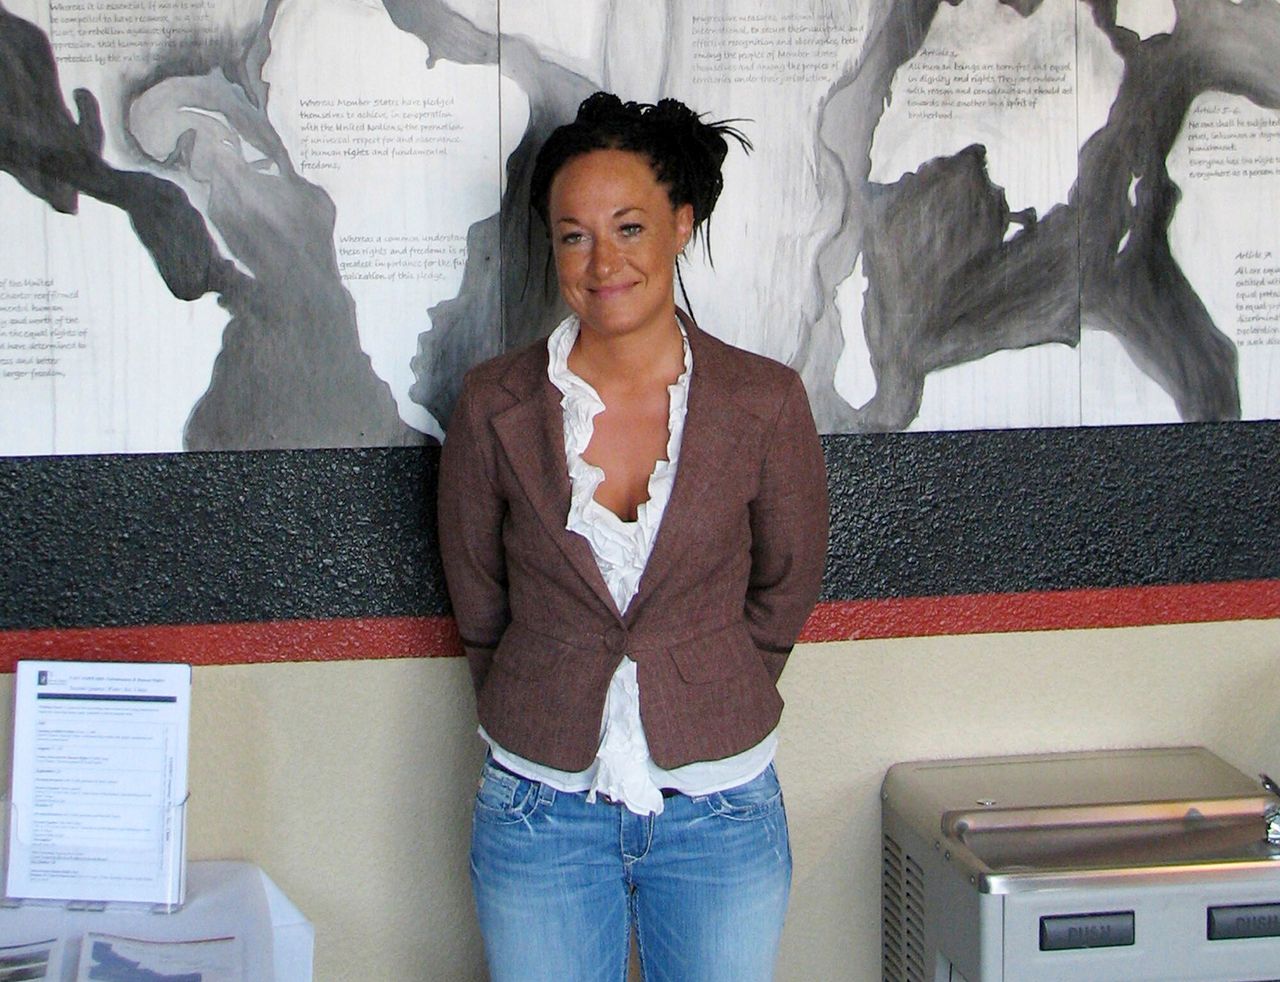 This July 24, 2009, file photo shows Rachel Dolezal, who made headlines for saying she was Black, even though she had been born white.